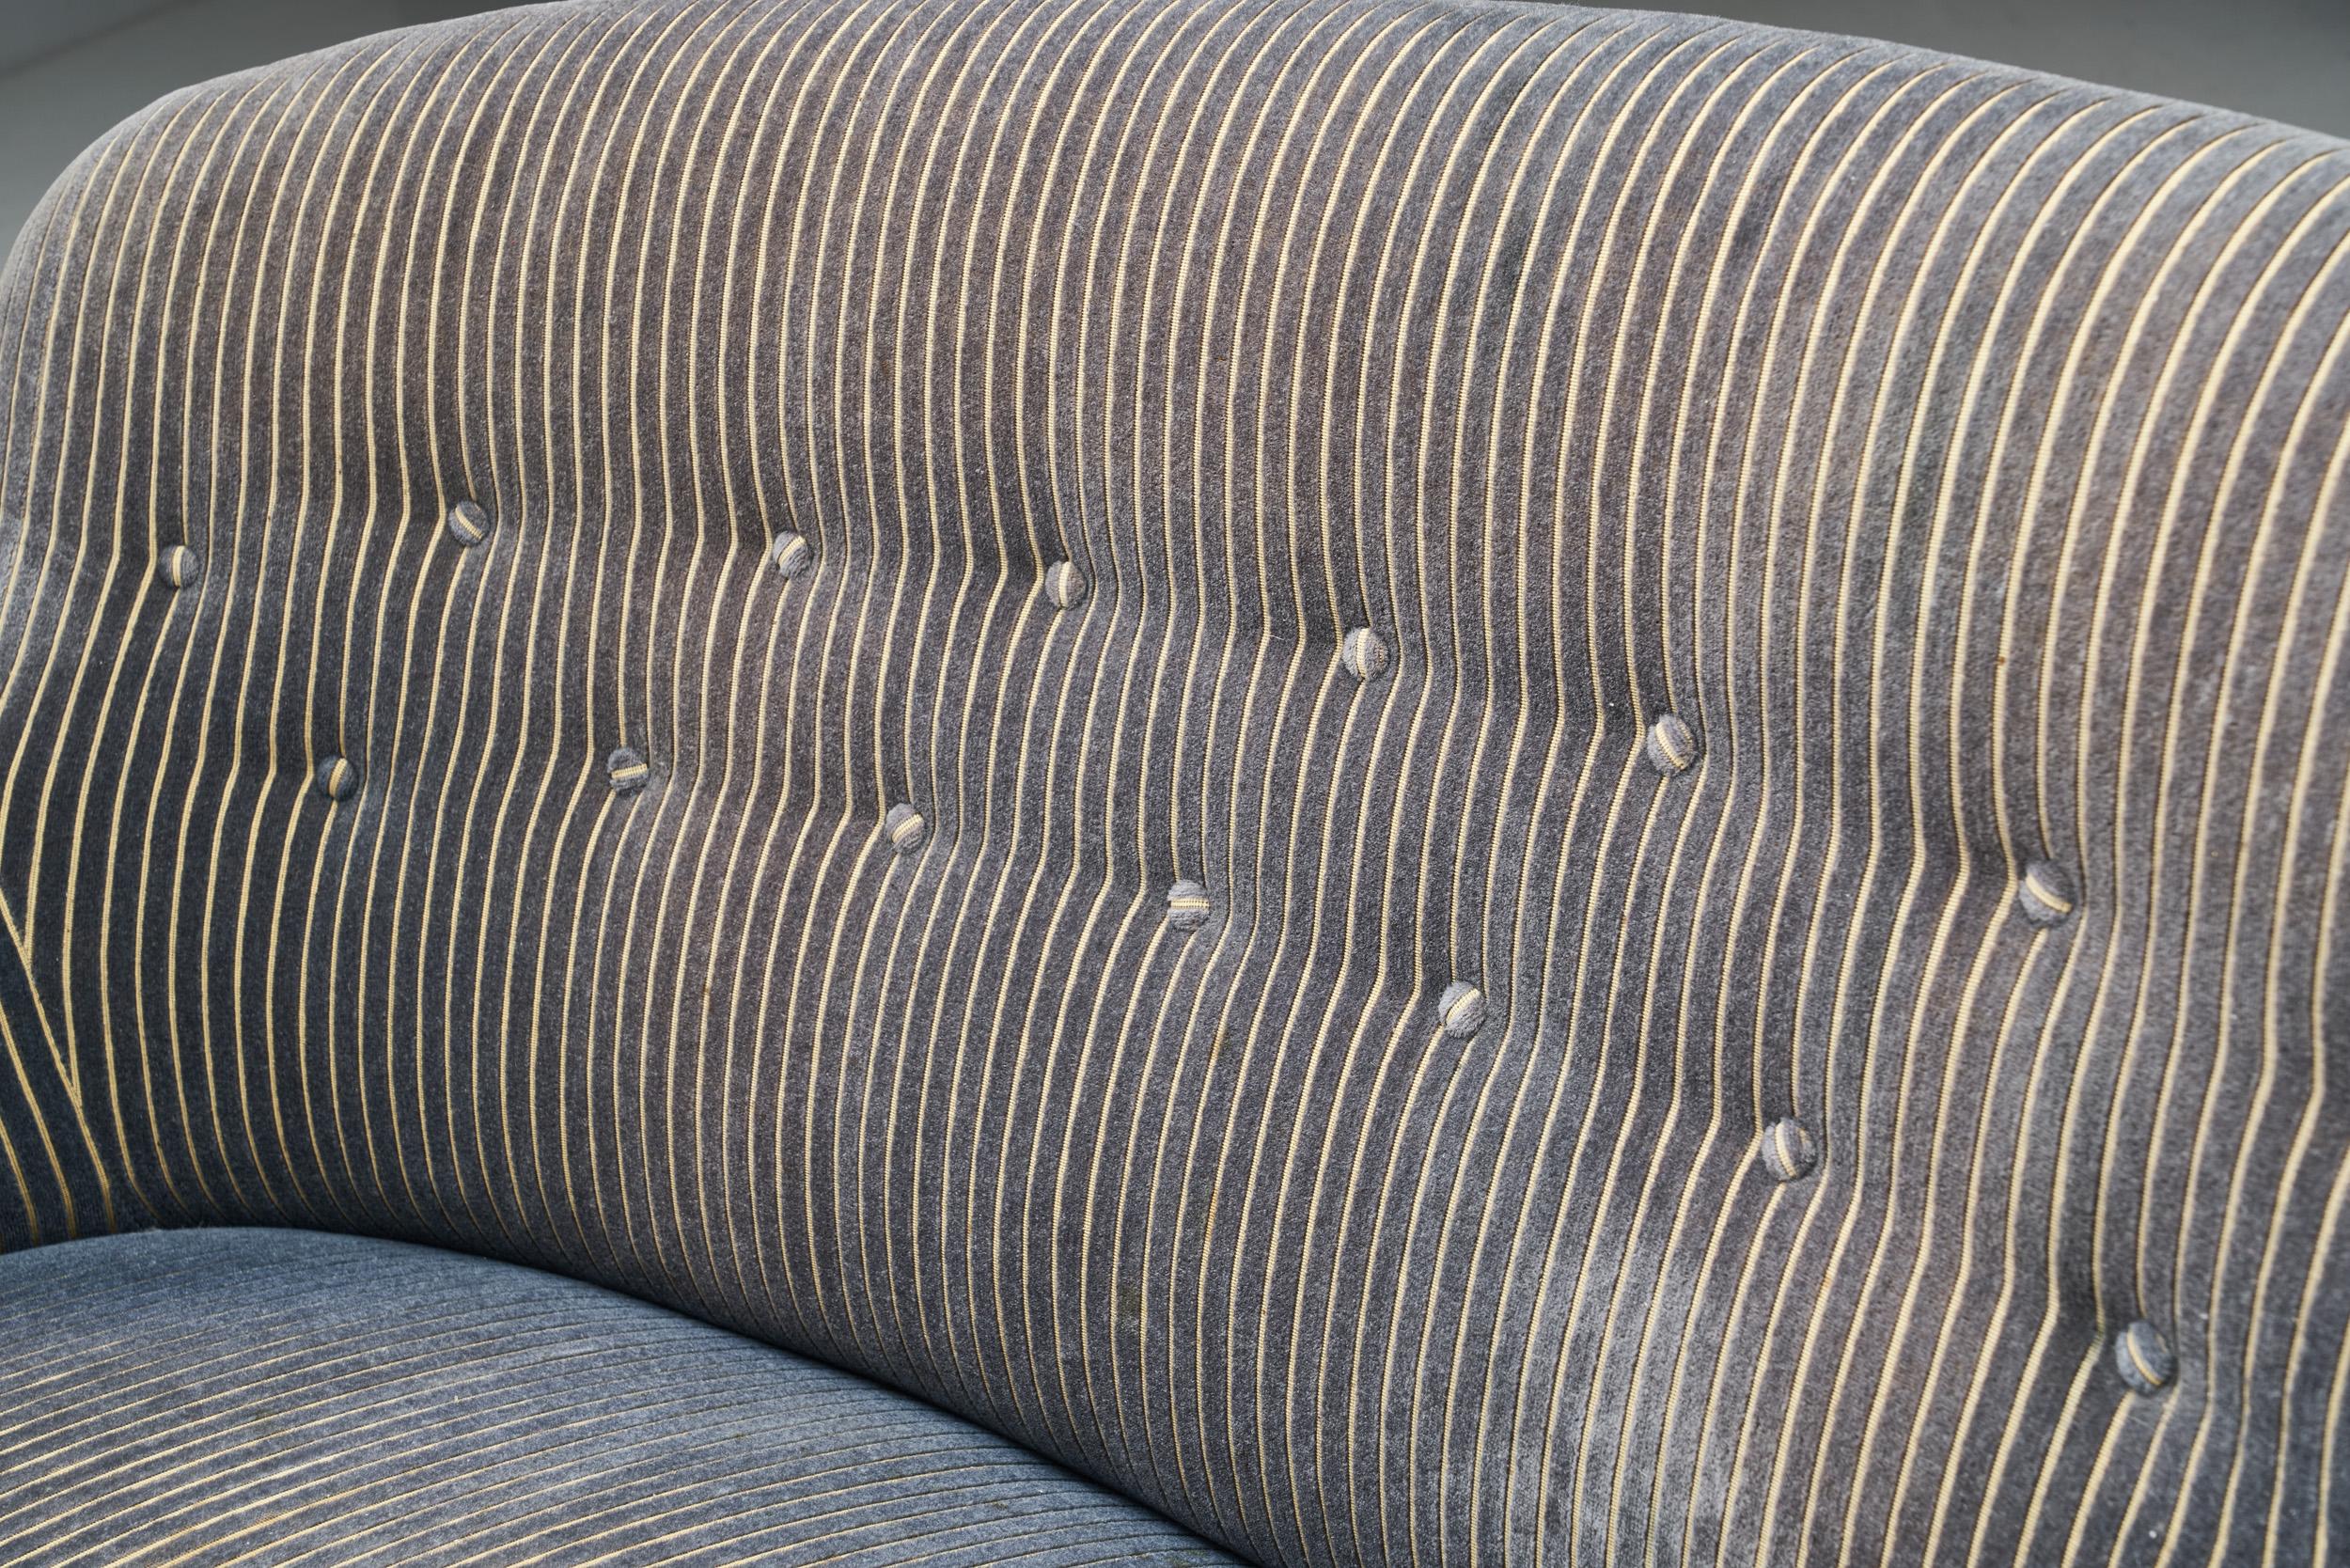 Danish Cabinetmaker Two-Seater Sofa with Striped Upholstery, Denmark 1940s For Sale 1